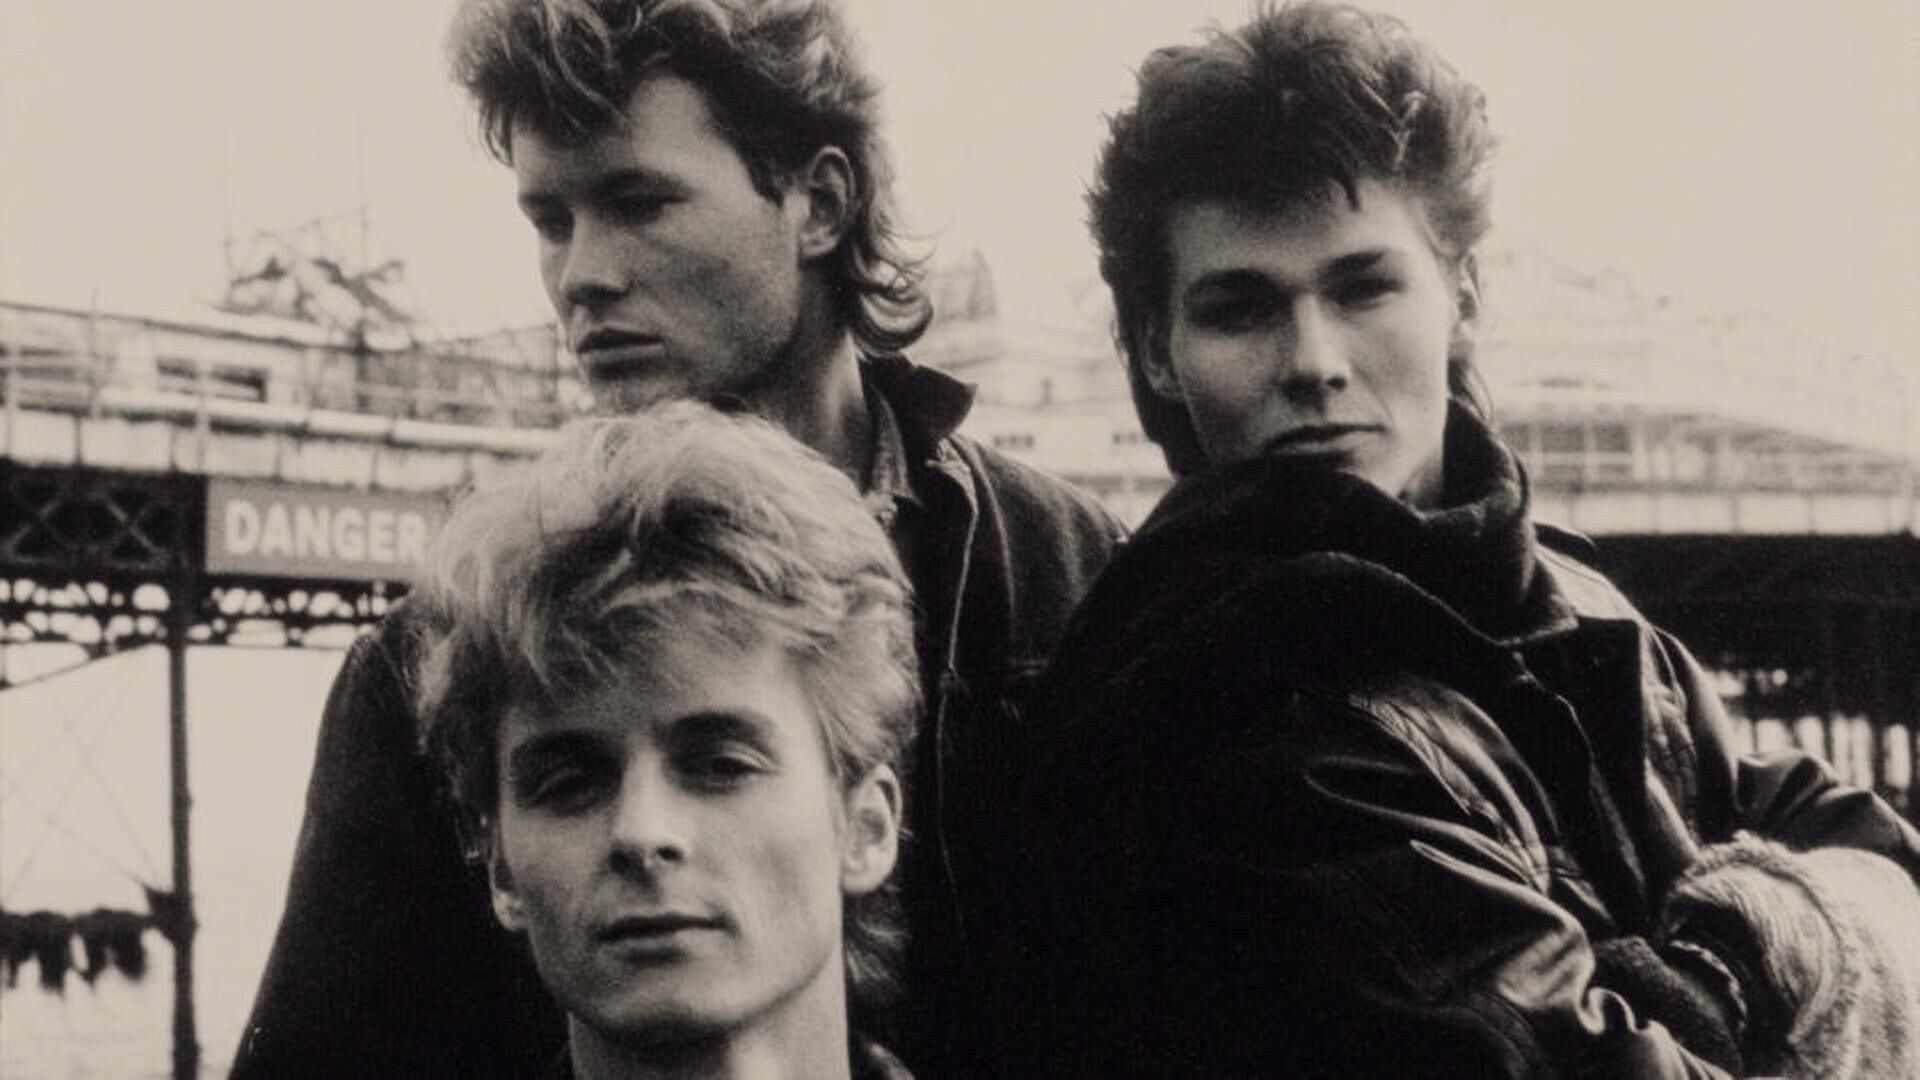 Morten Harket 'never doubted' a-ha's success when they released debut album  'Hunting High and Low' [Exclusive] - RETROPOP - Fashionably Nostalgic |  News, Interviews, Reviews, and more...